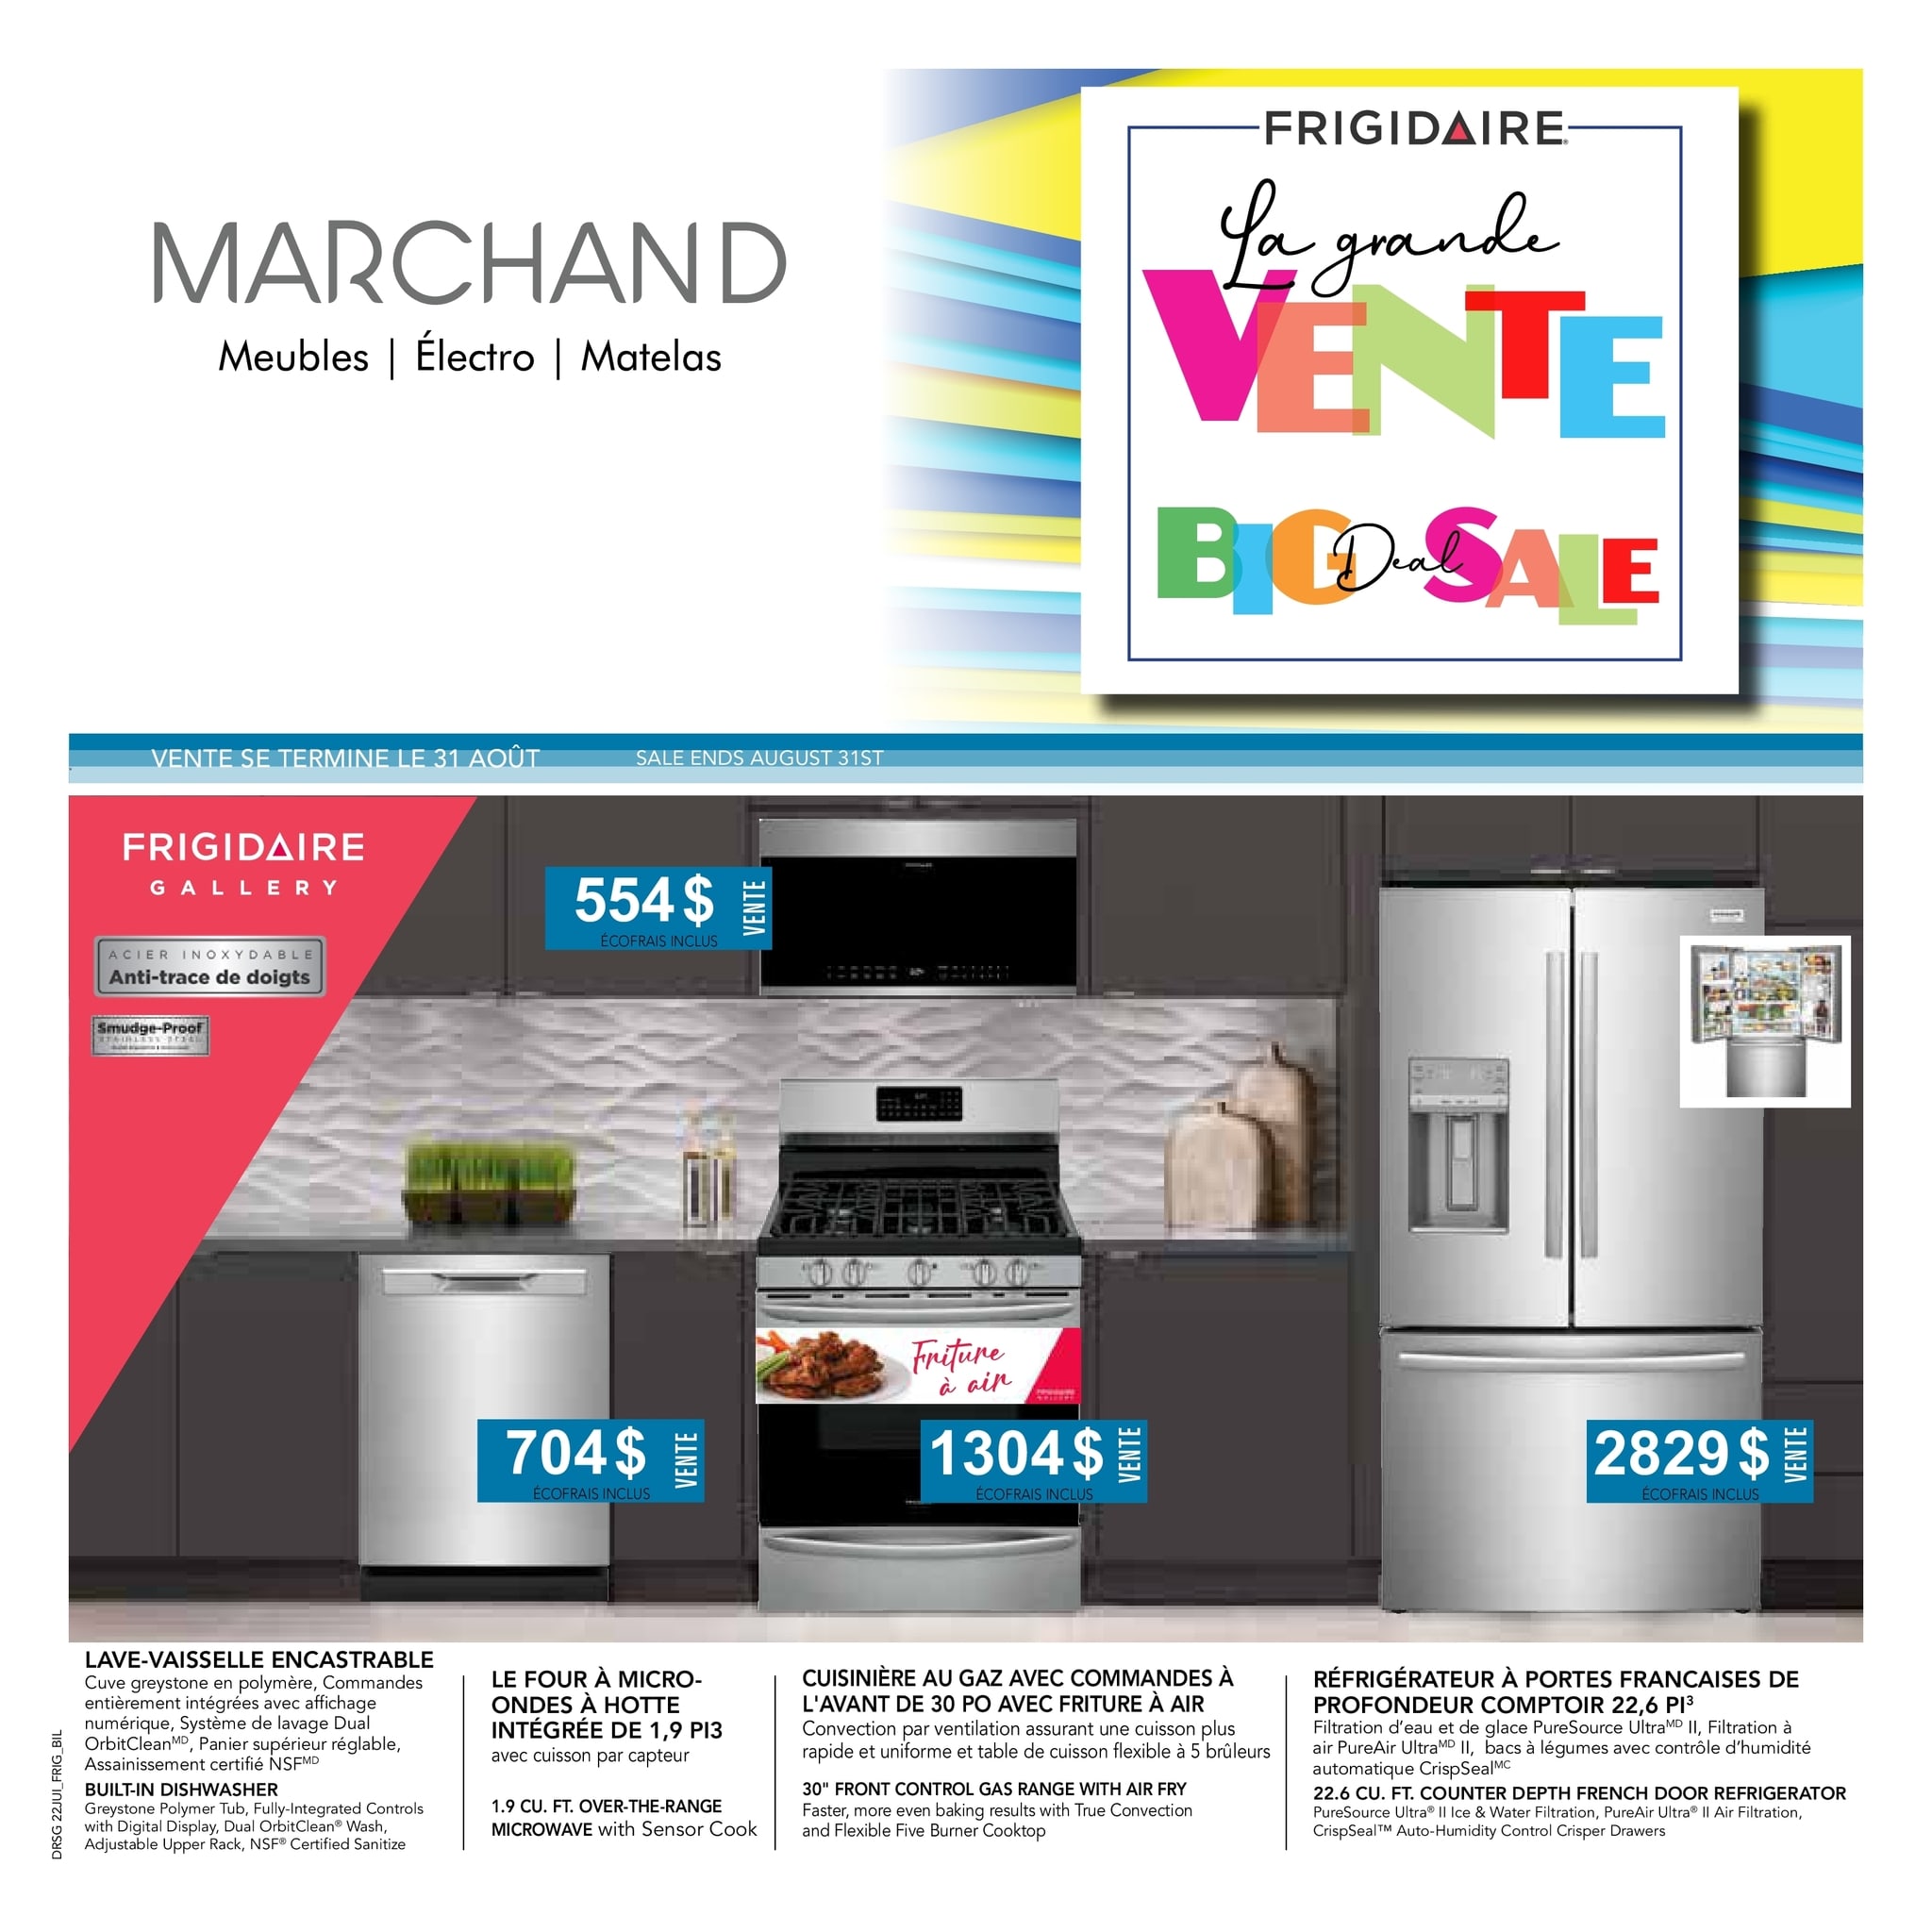 Circulaire Meubles Marchand - Frigidaire - Page 1